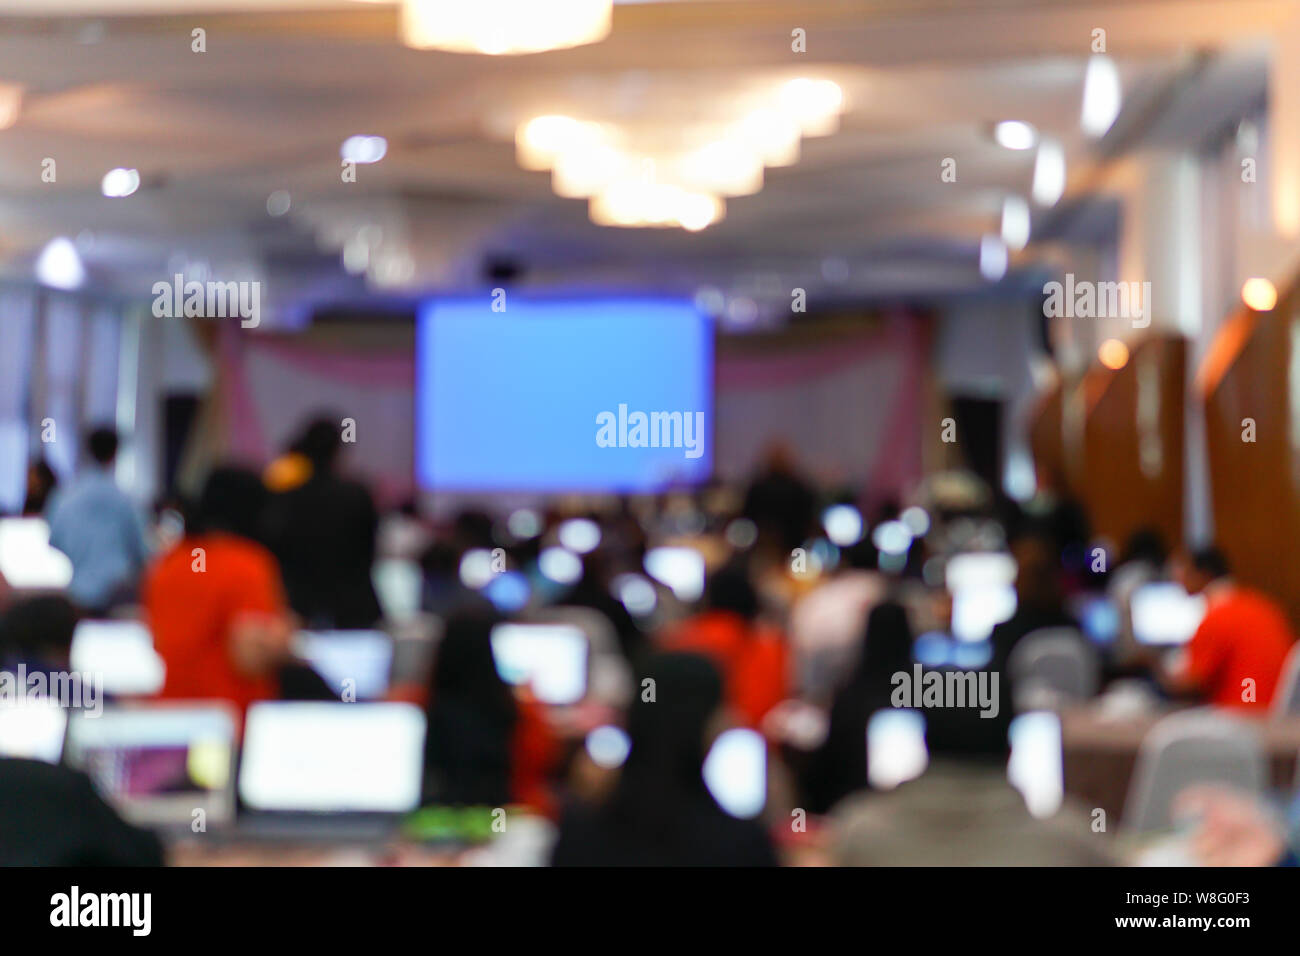 Blurry image in conference room. Abstract blurred people lecture and discussion in seminar room or conference room. Stock Photo